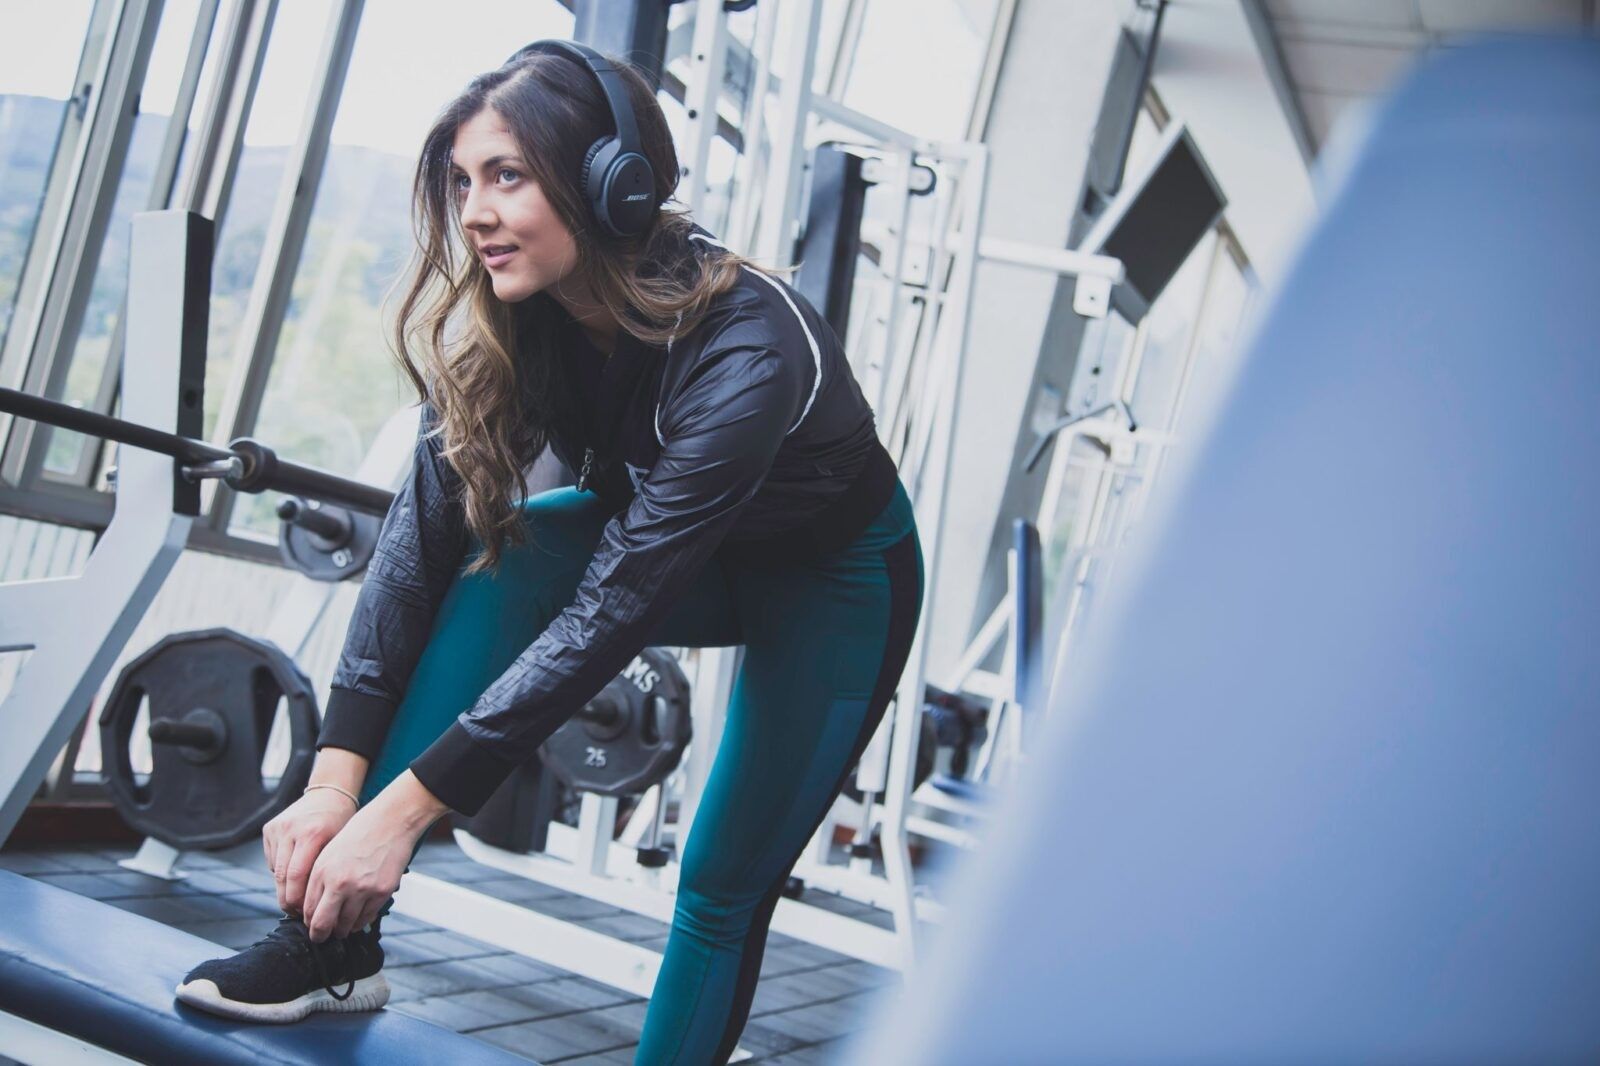 woman-listening-to-music-gym